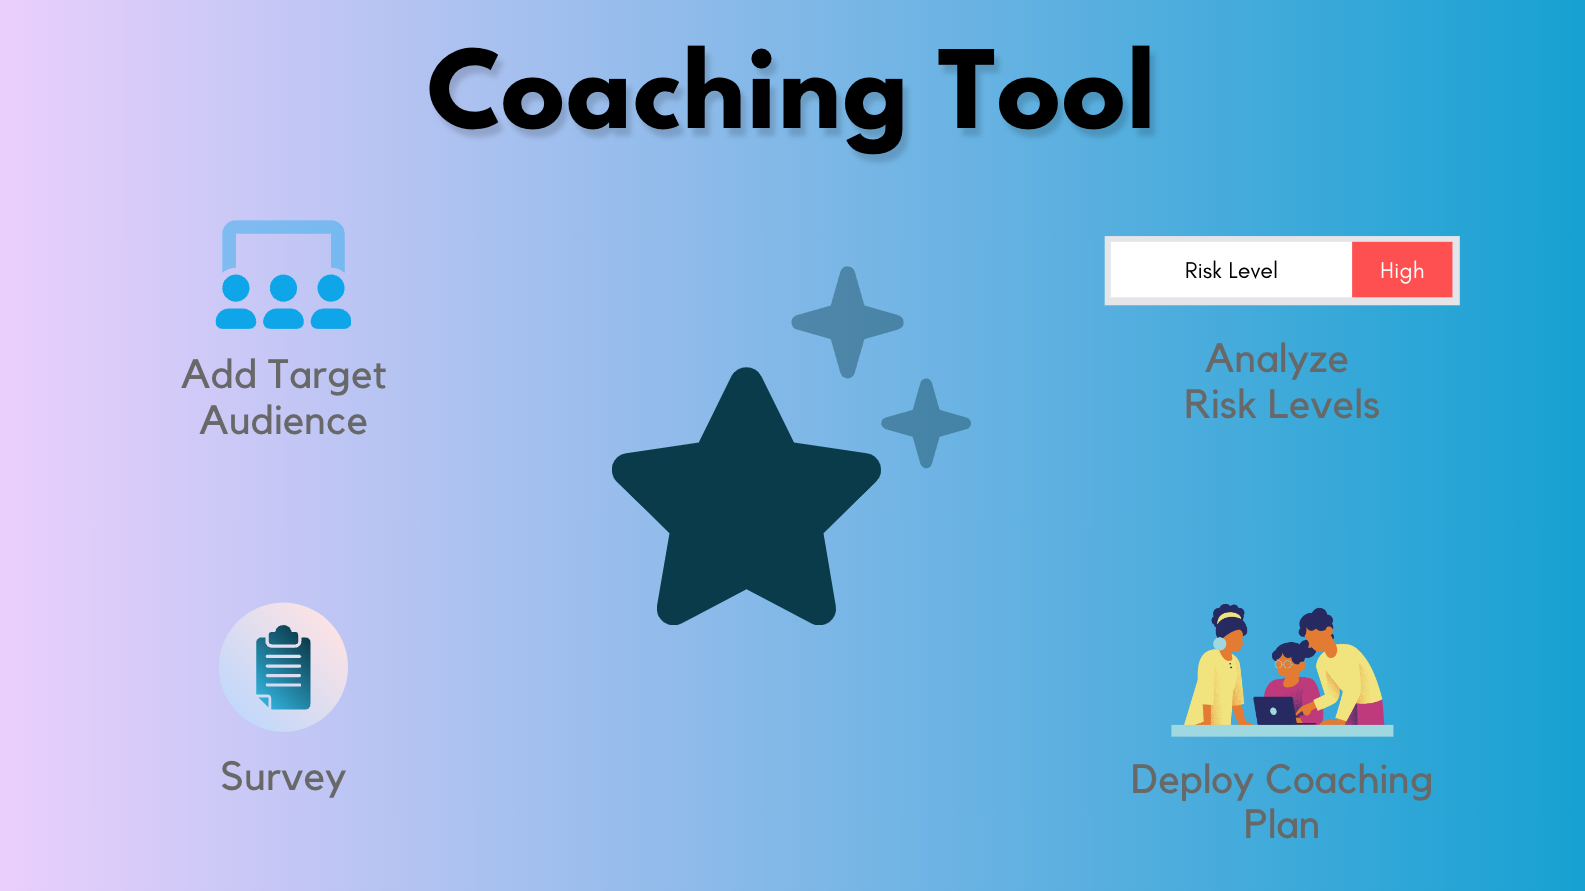 OCMS Portal - Coaching Managers and Employees Assessment Tool